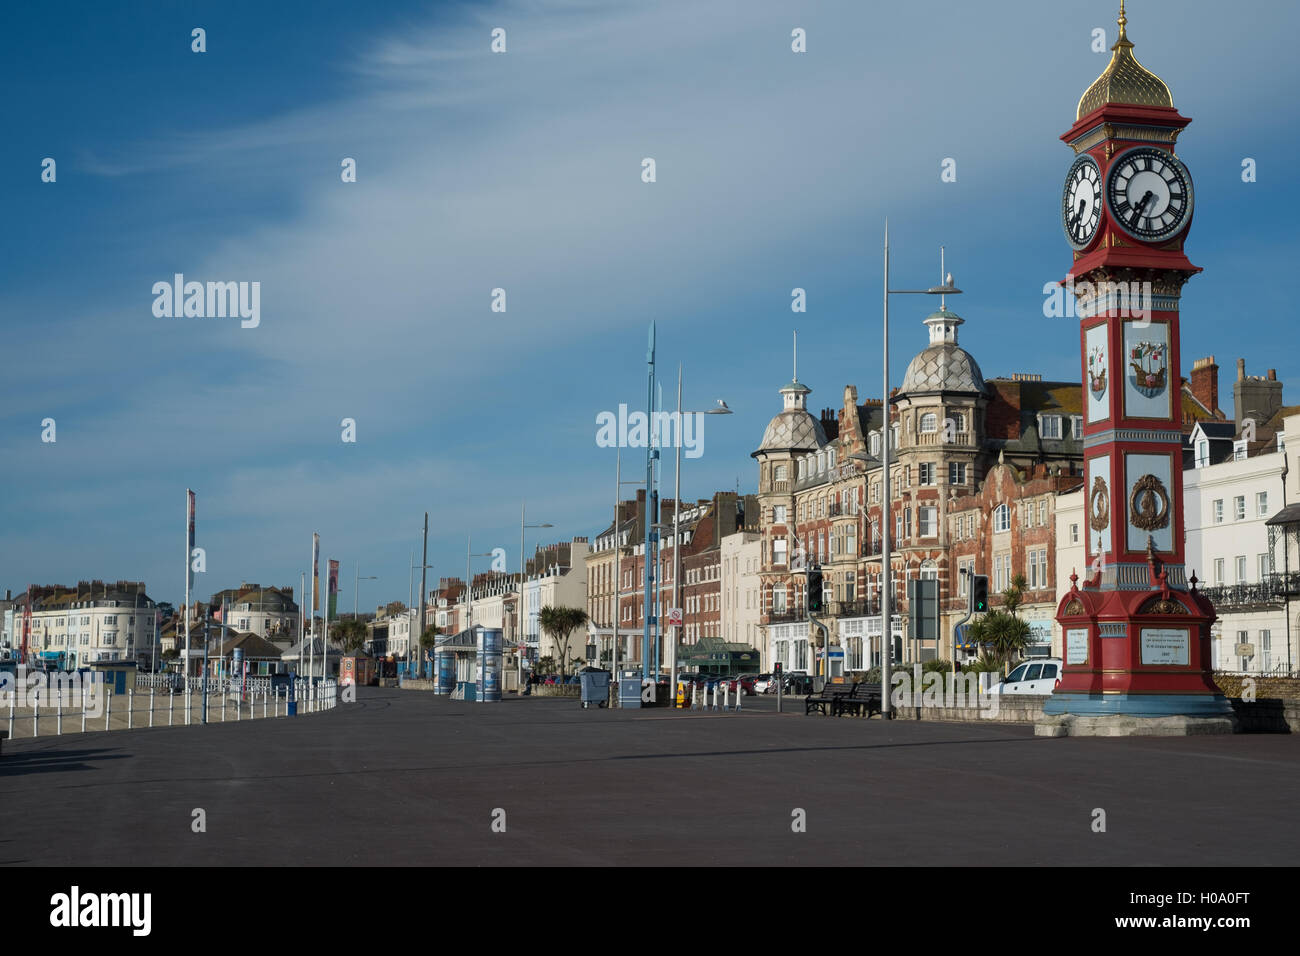 Weymouth seafront and Clock Tower Stock Photo